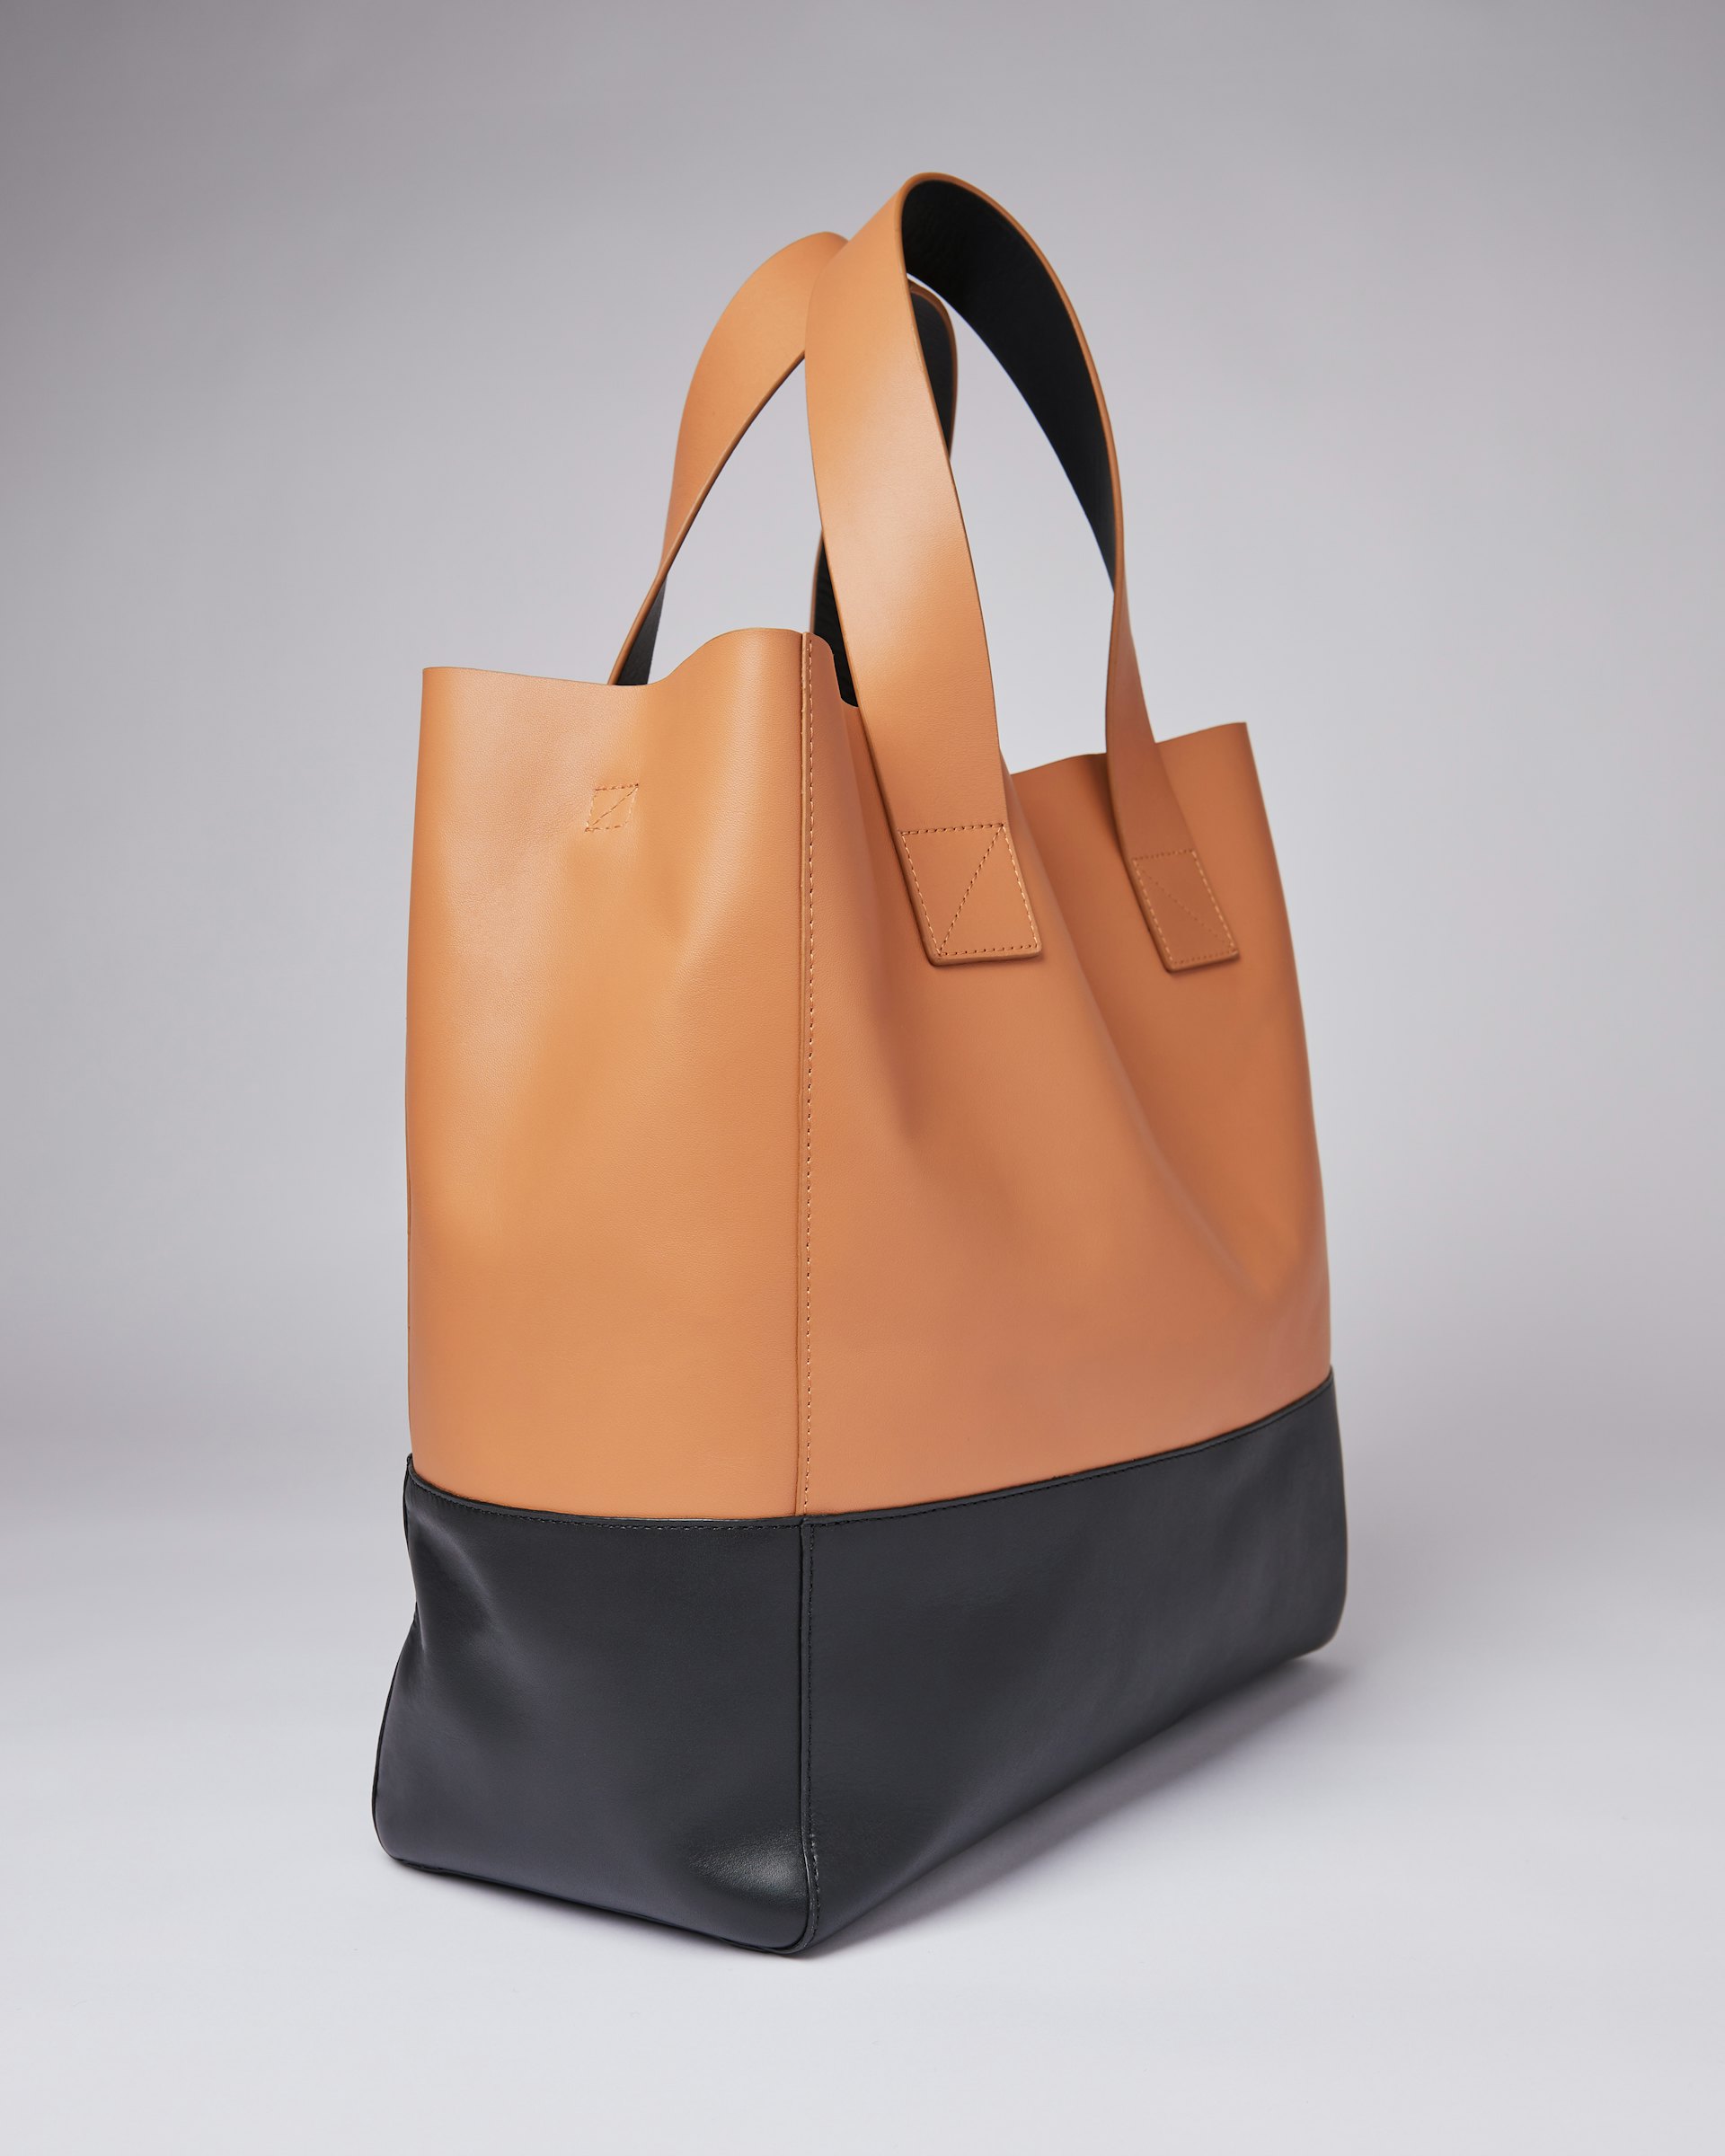 Iris belongs to the category Shoulder bags and is in color black & toffee (4 of 6)